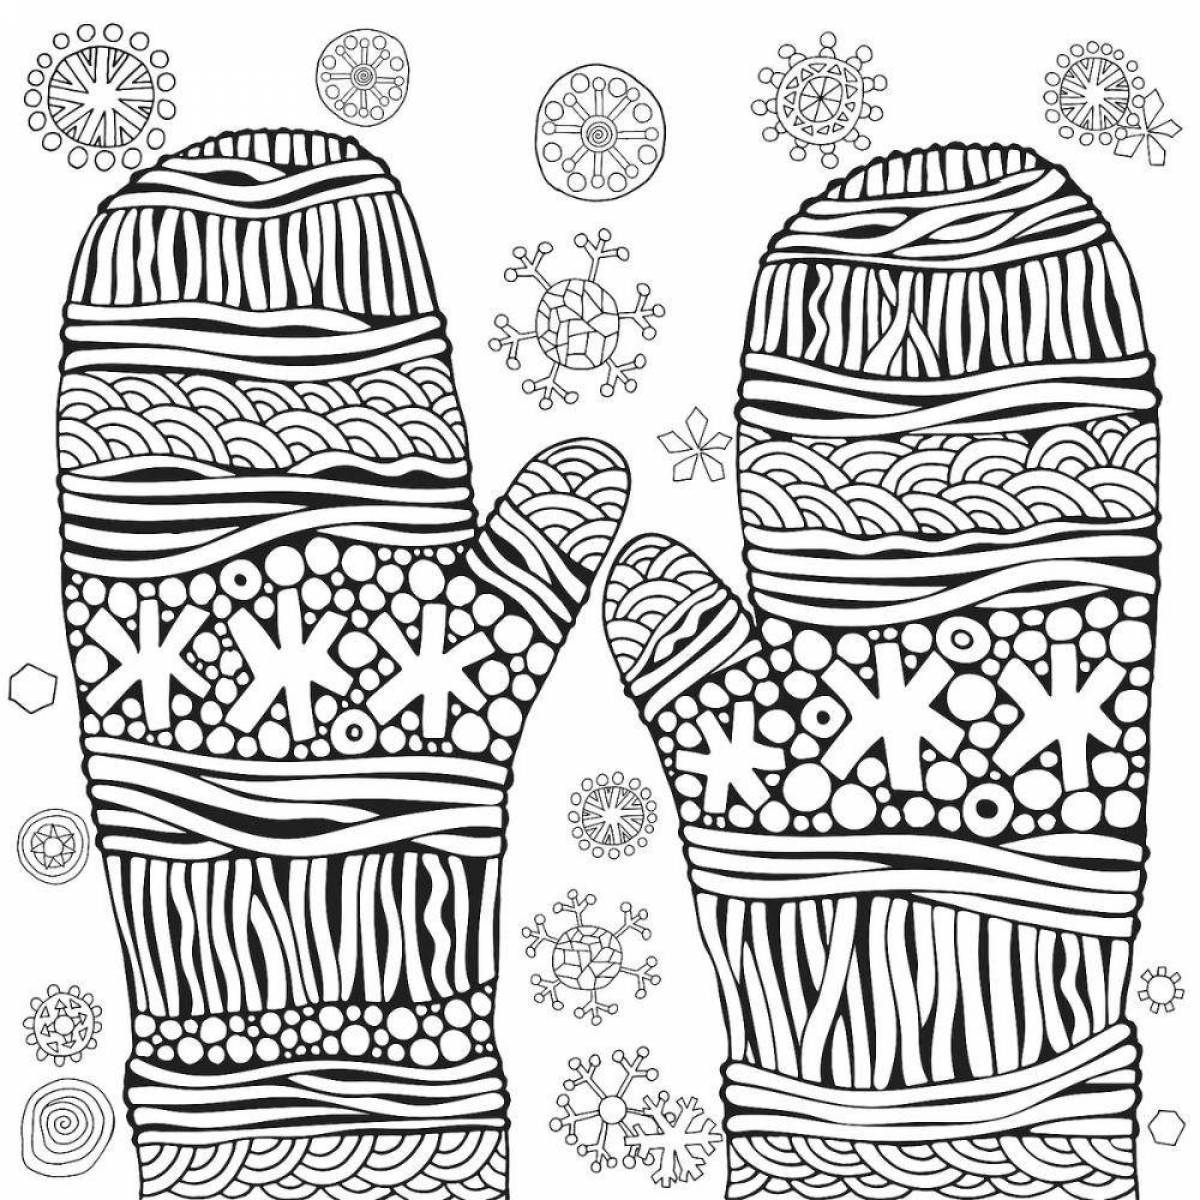 Coloring a mitten with a bright pattern